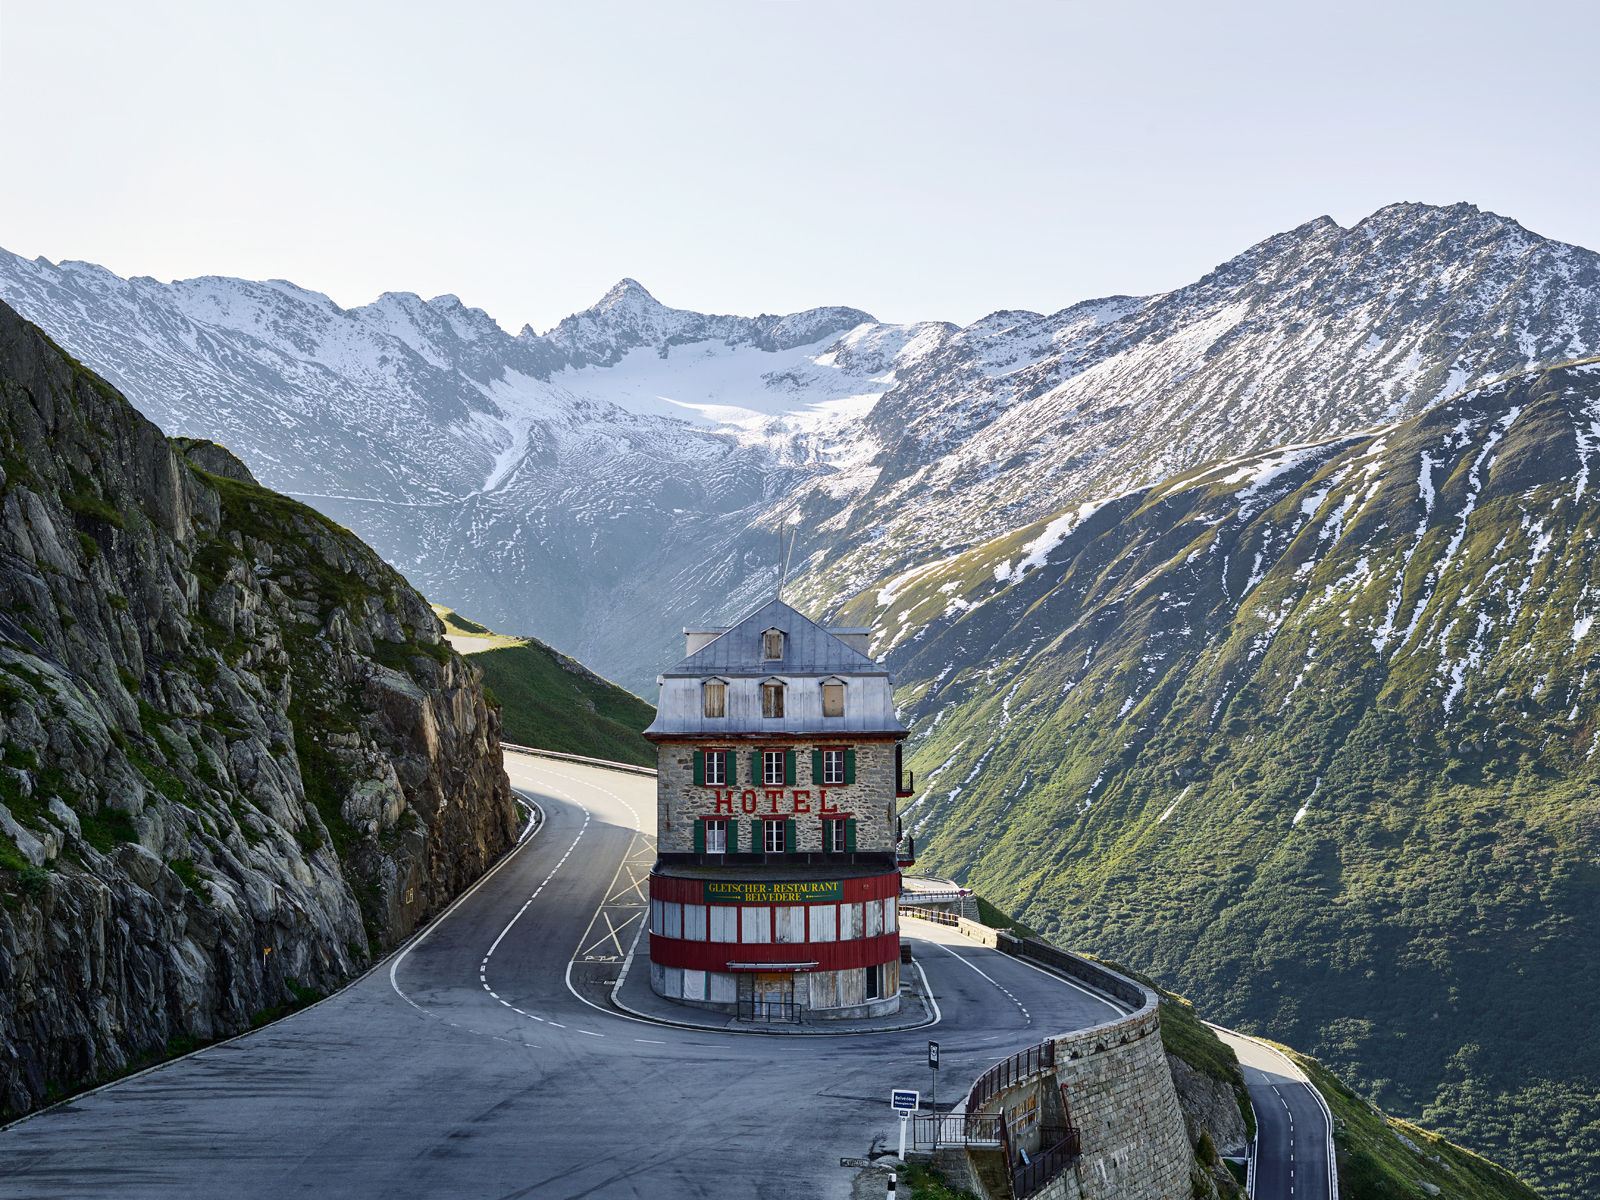 Hotel Belevdere, Furka Pass, Switzerland. Swiss Alps, hairpin, cycling, landscape photography